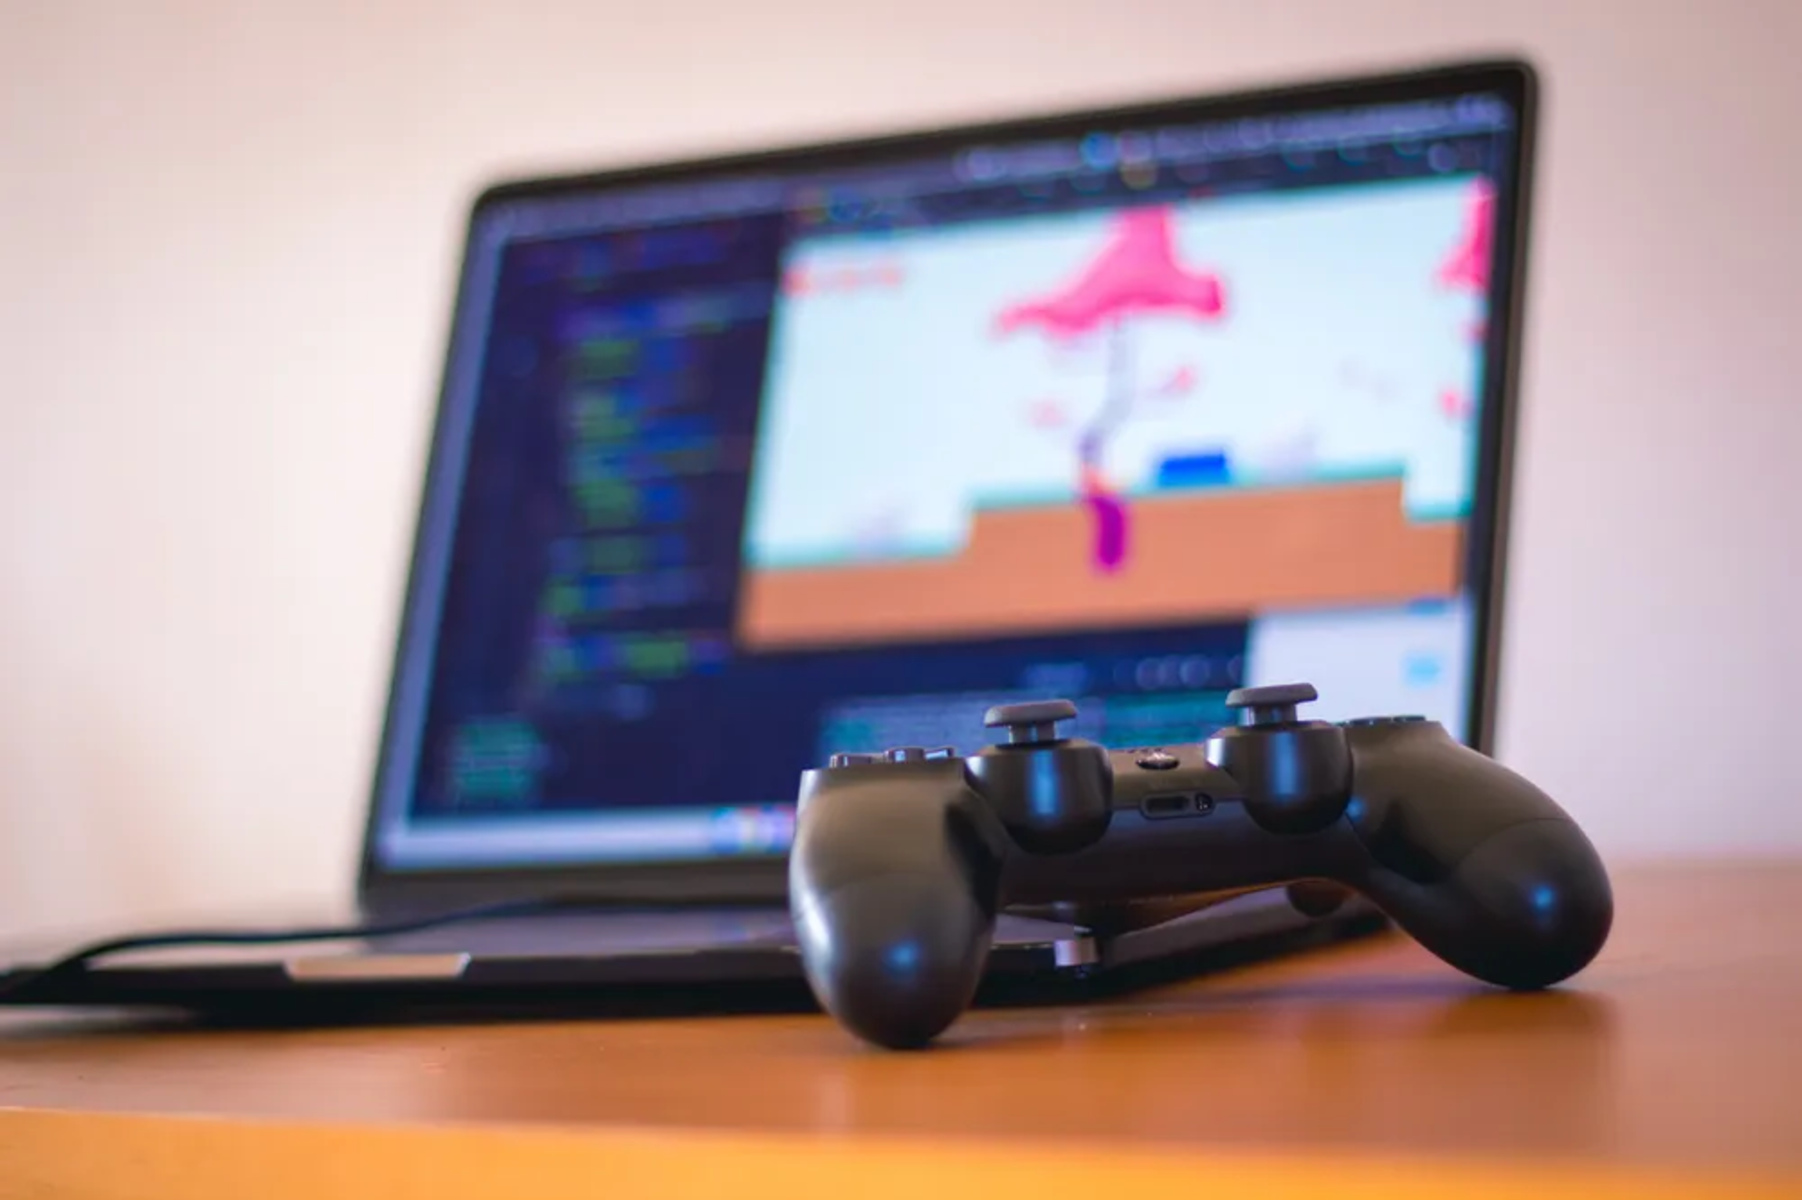 How To Connect PS4 To Laptop With HDMI Without Capture Card